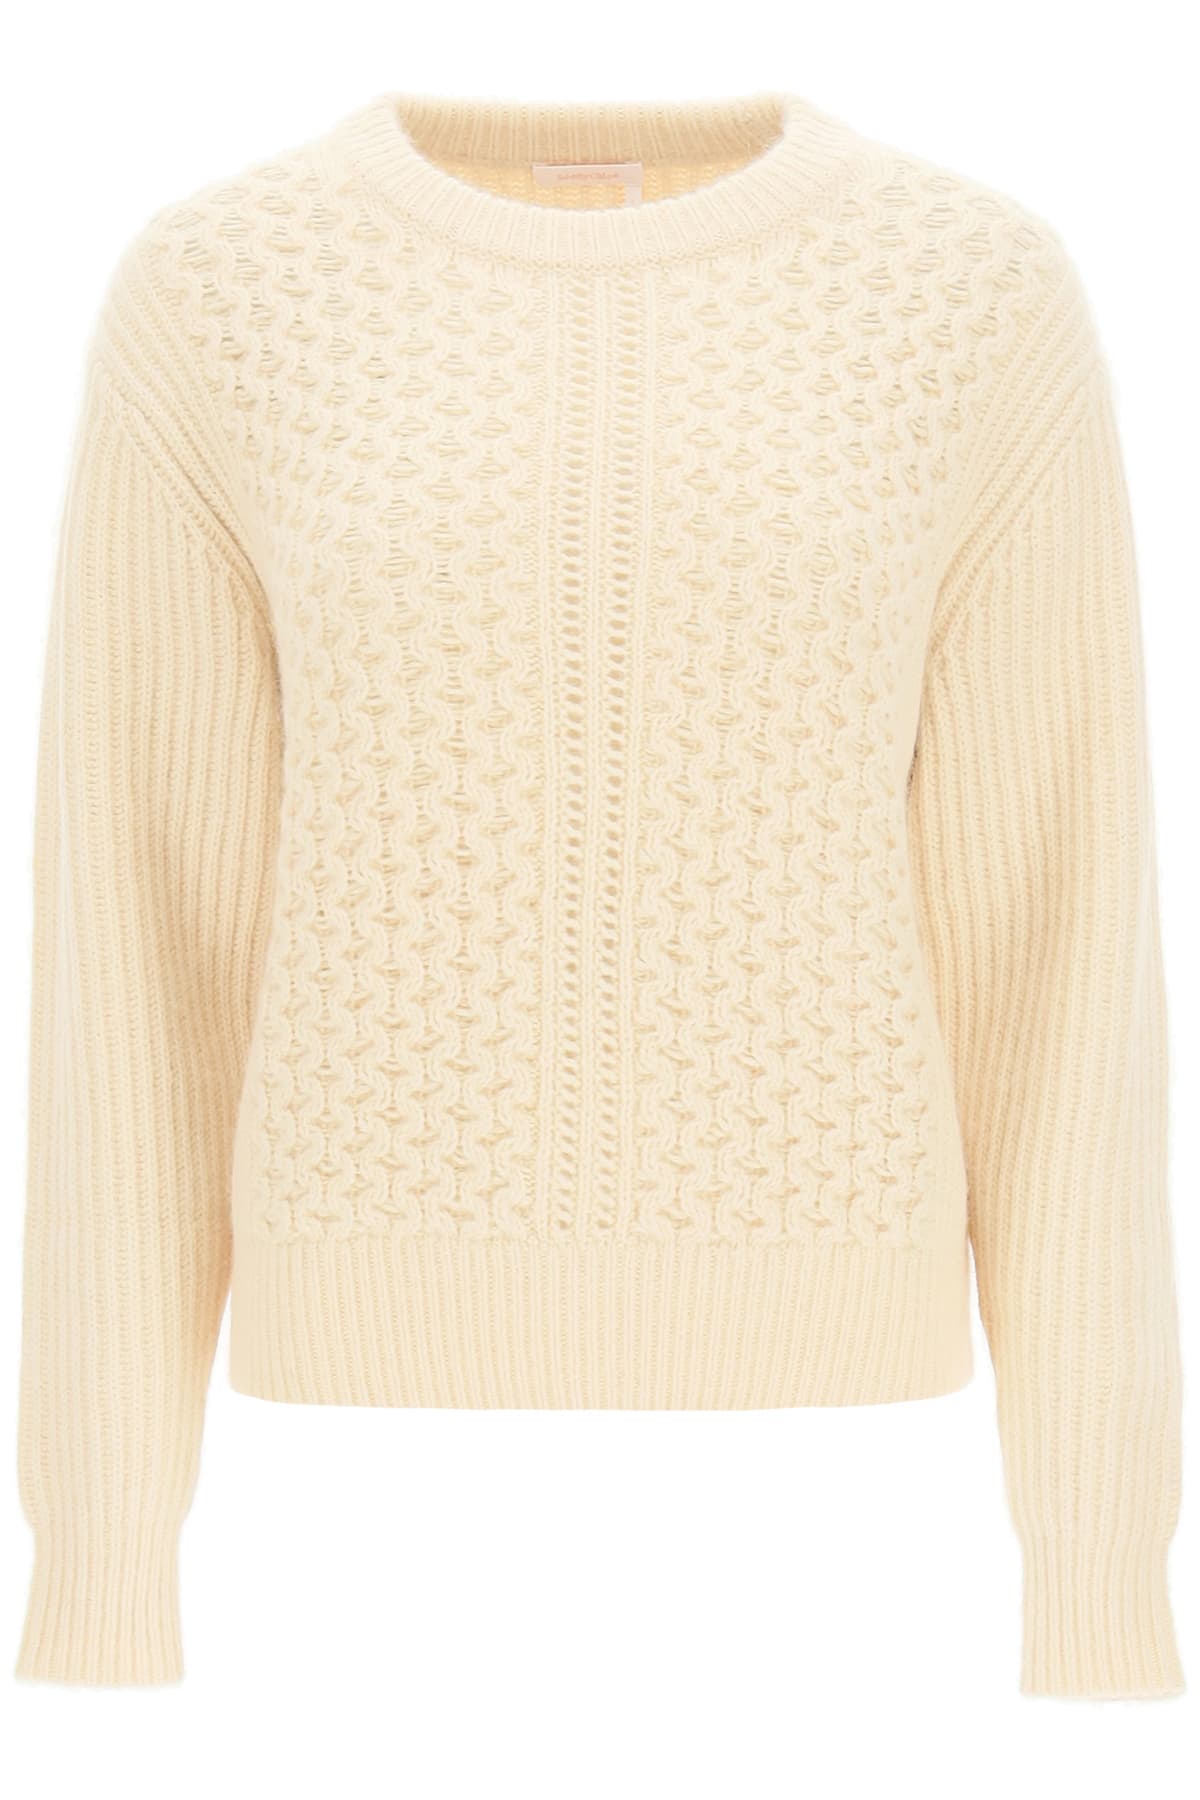 See by Chloé Alpaca And Wool Sweater